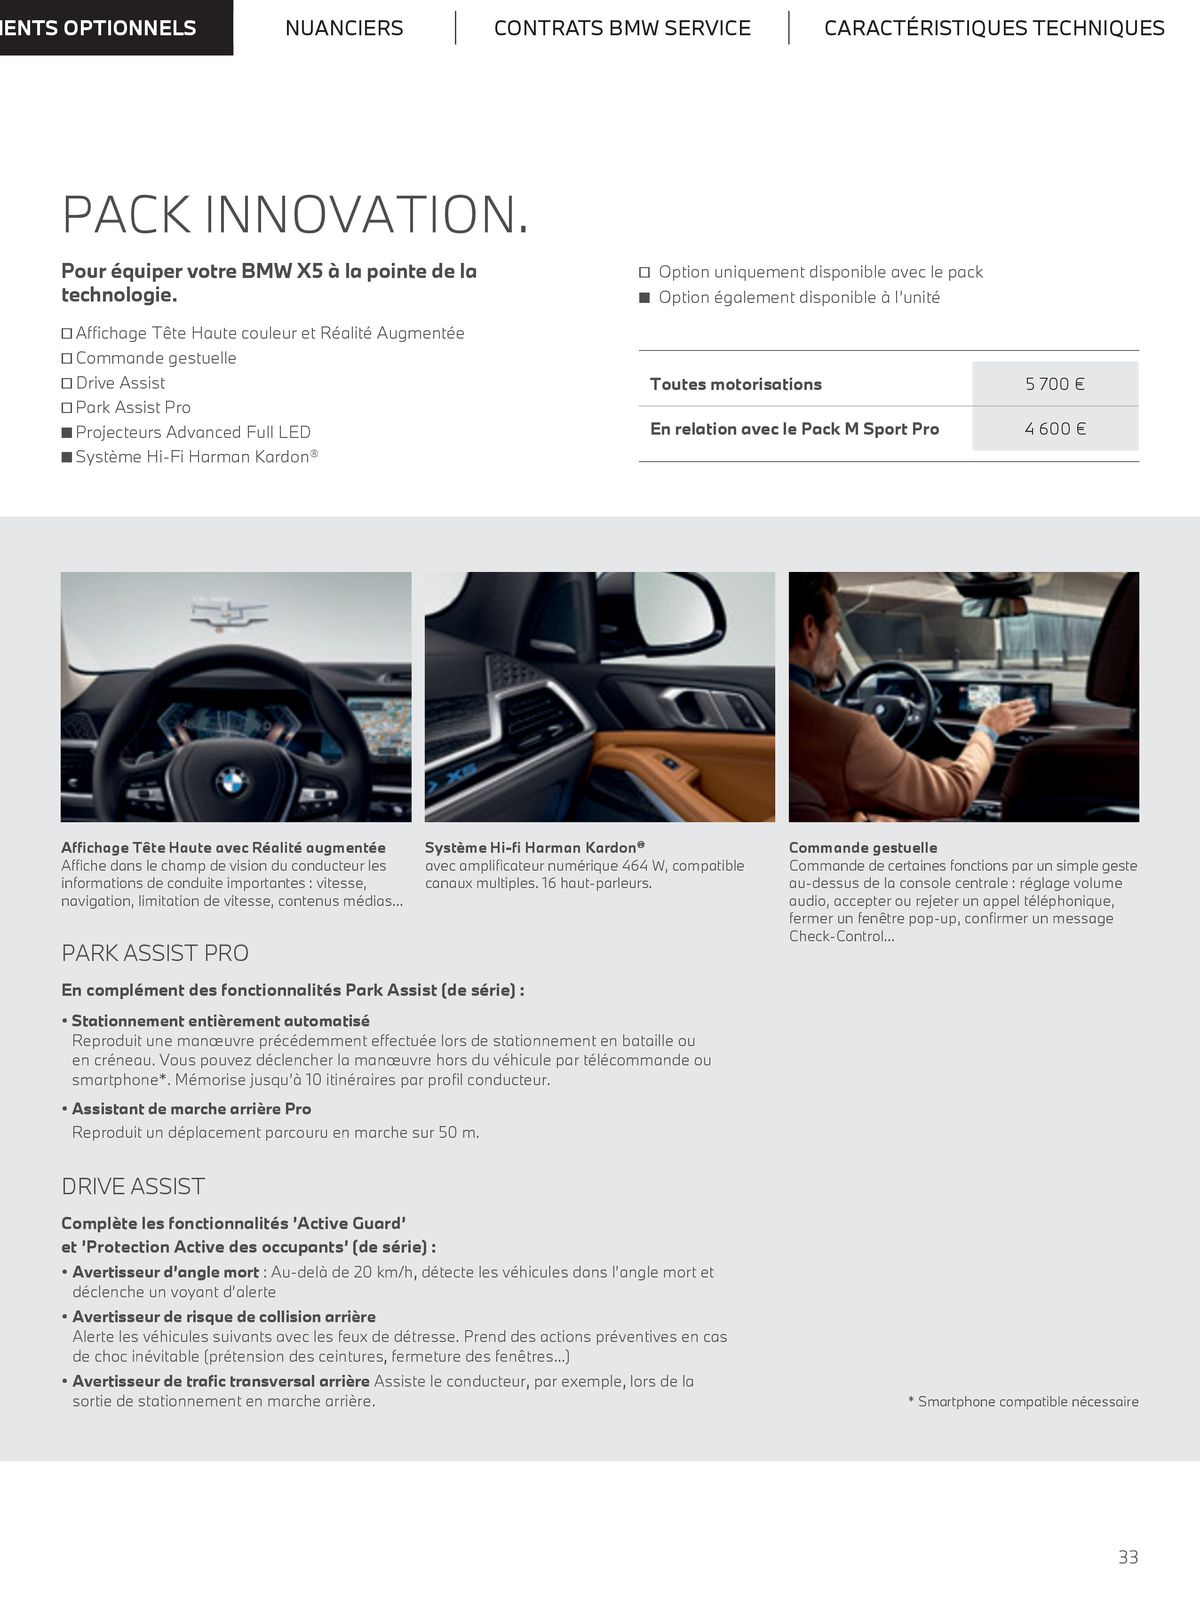 Catalogue The new X5, page 00033